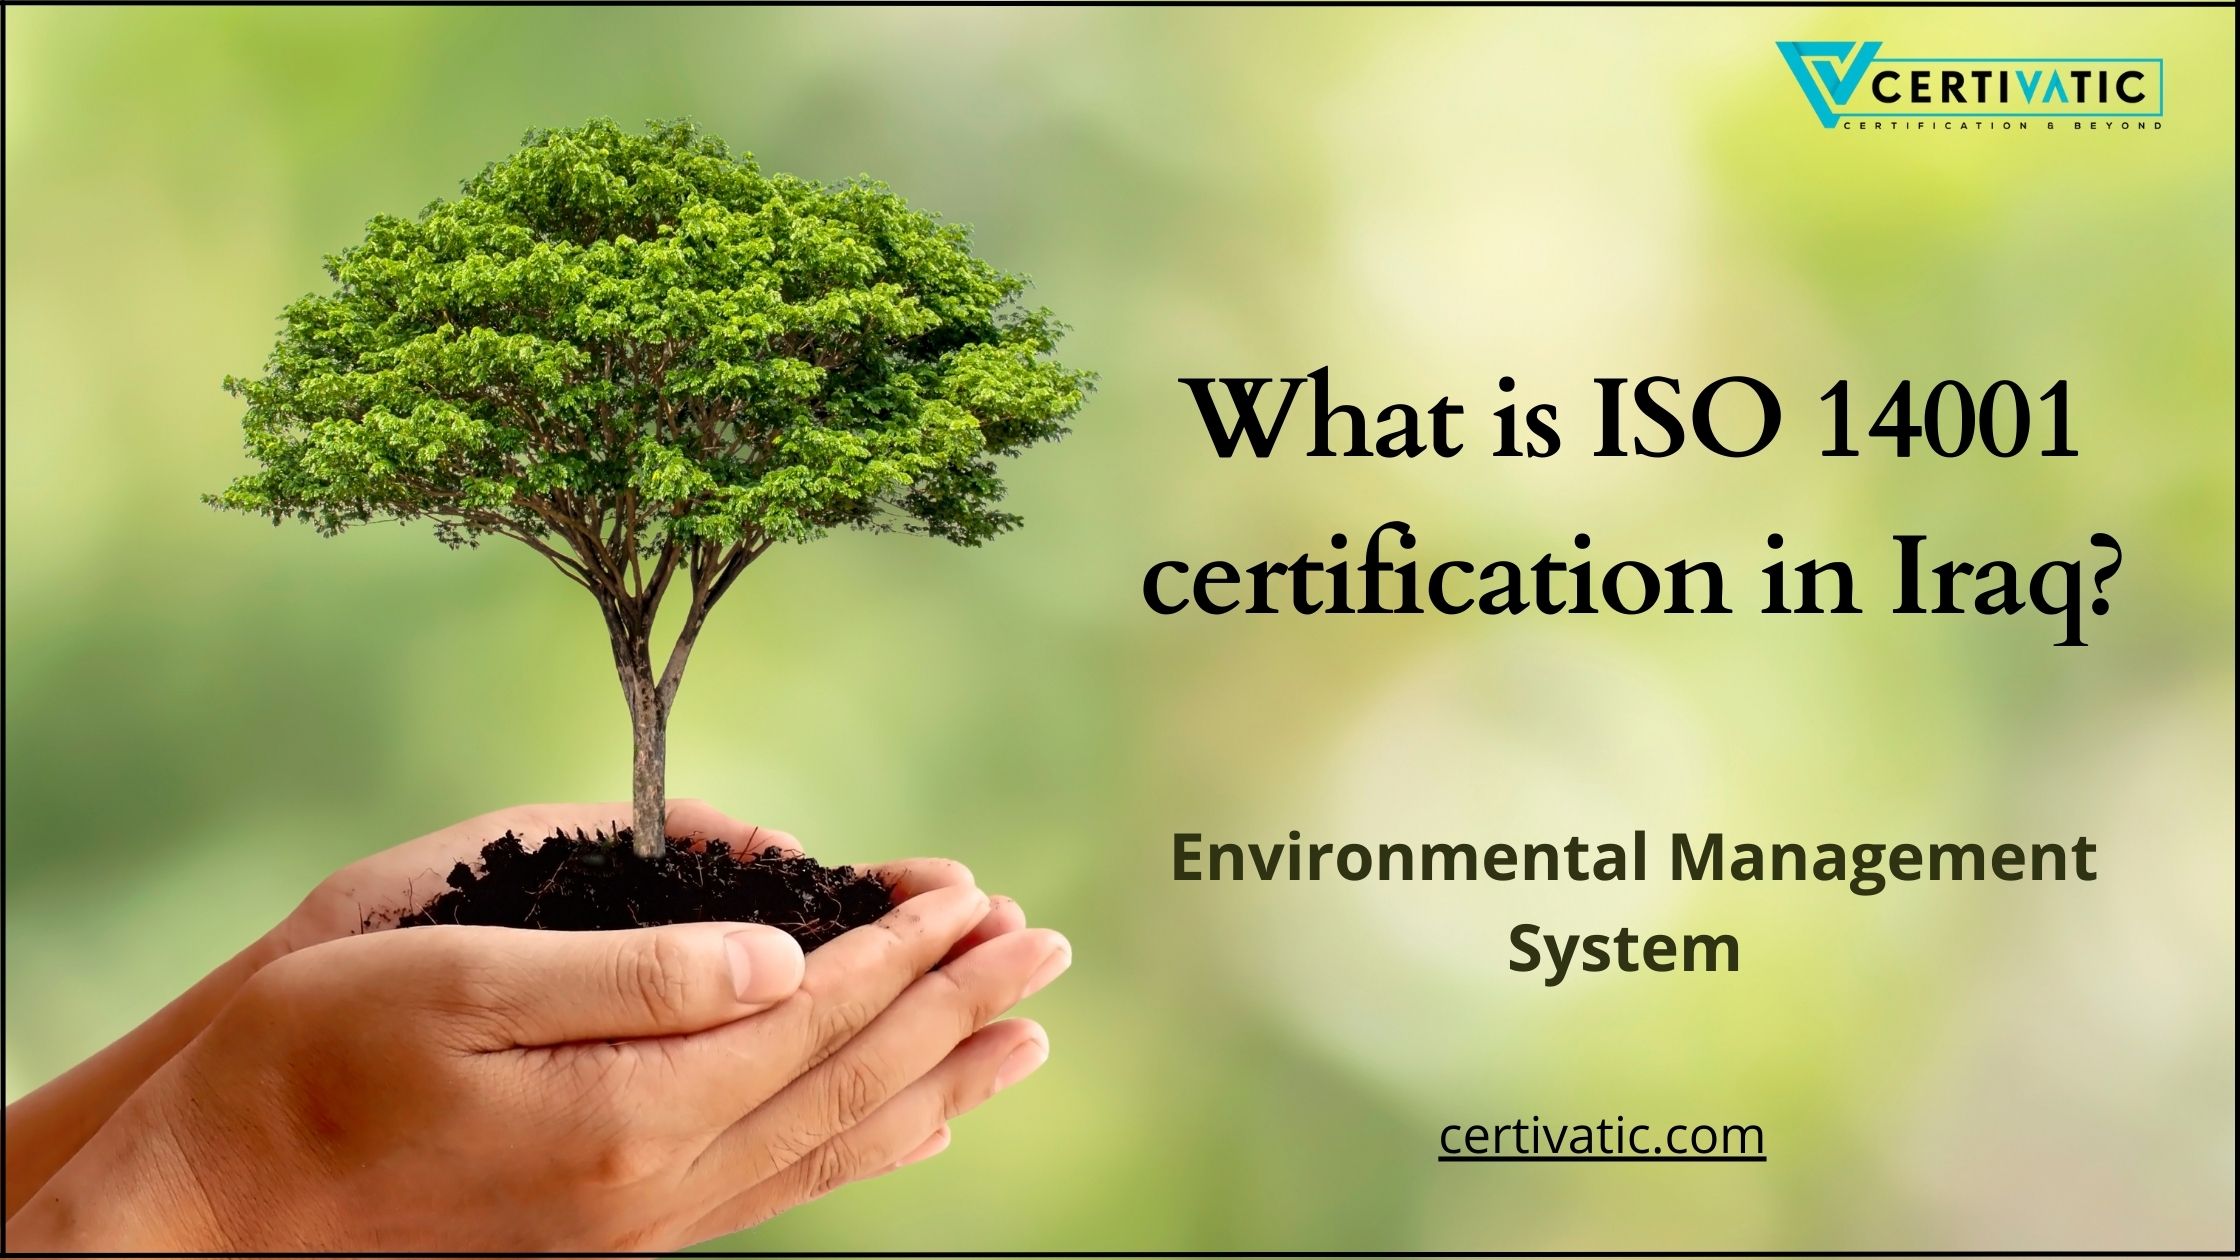 What is ISO 14001 Certification in Iraq?